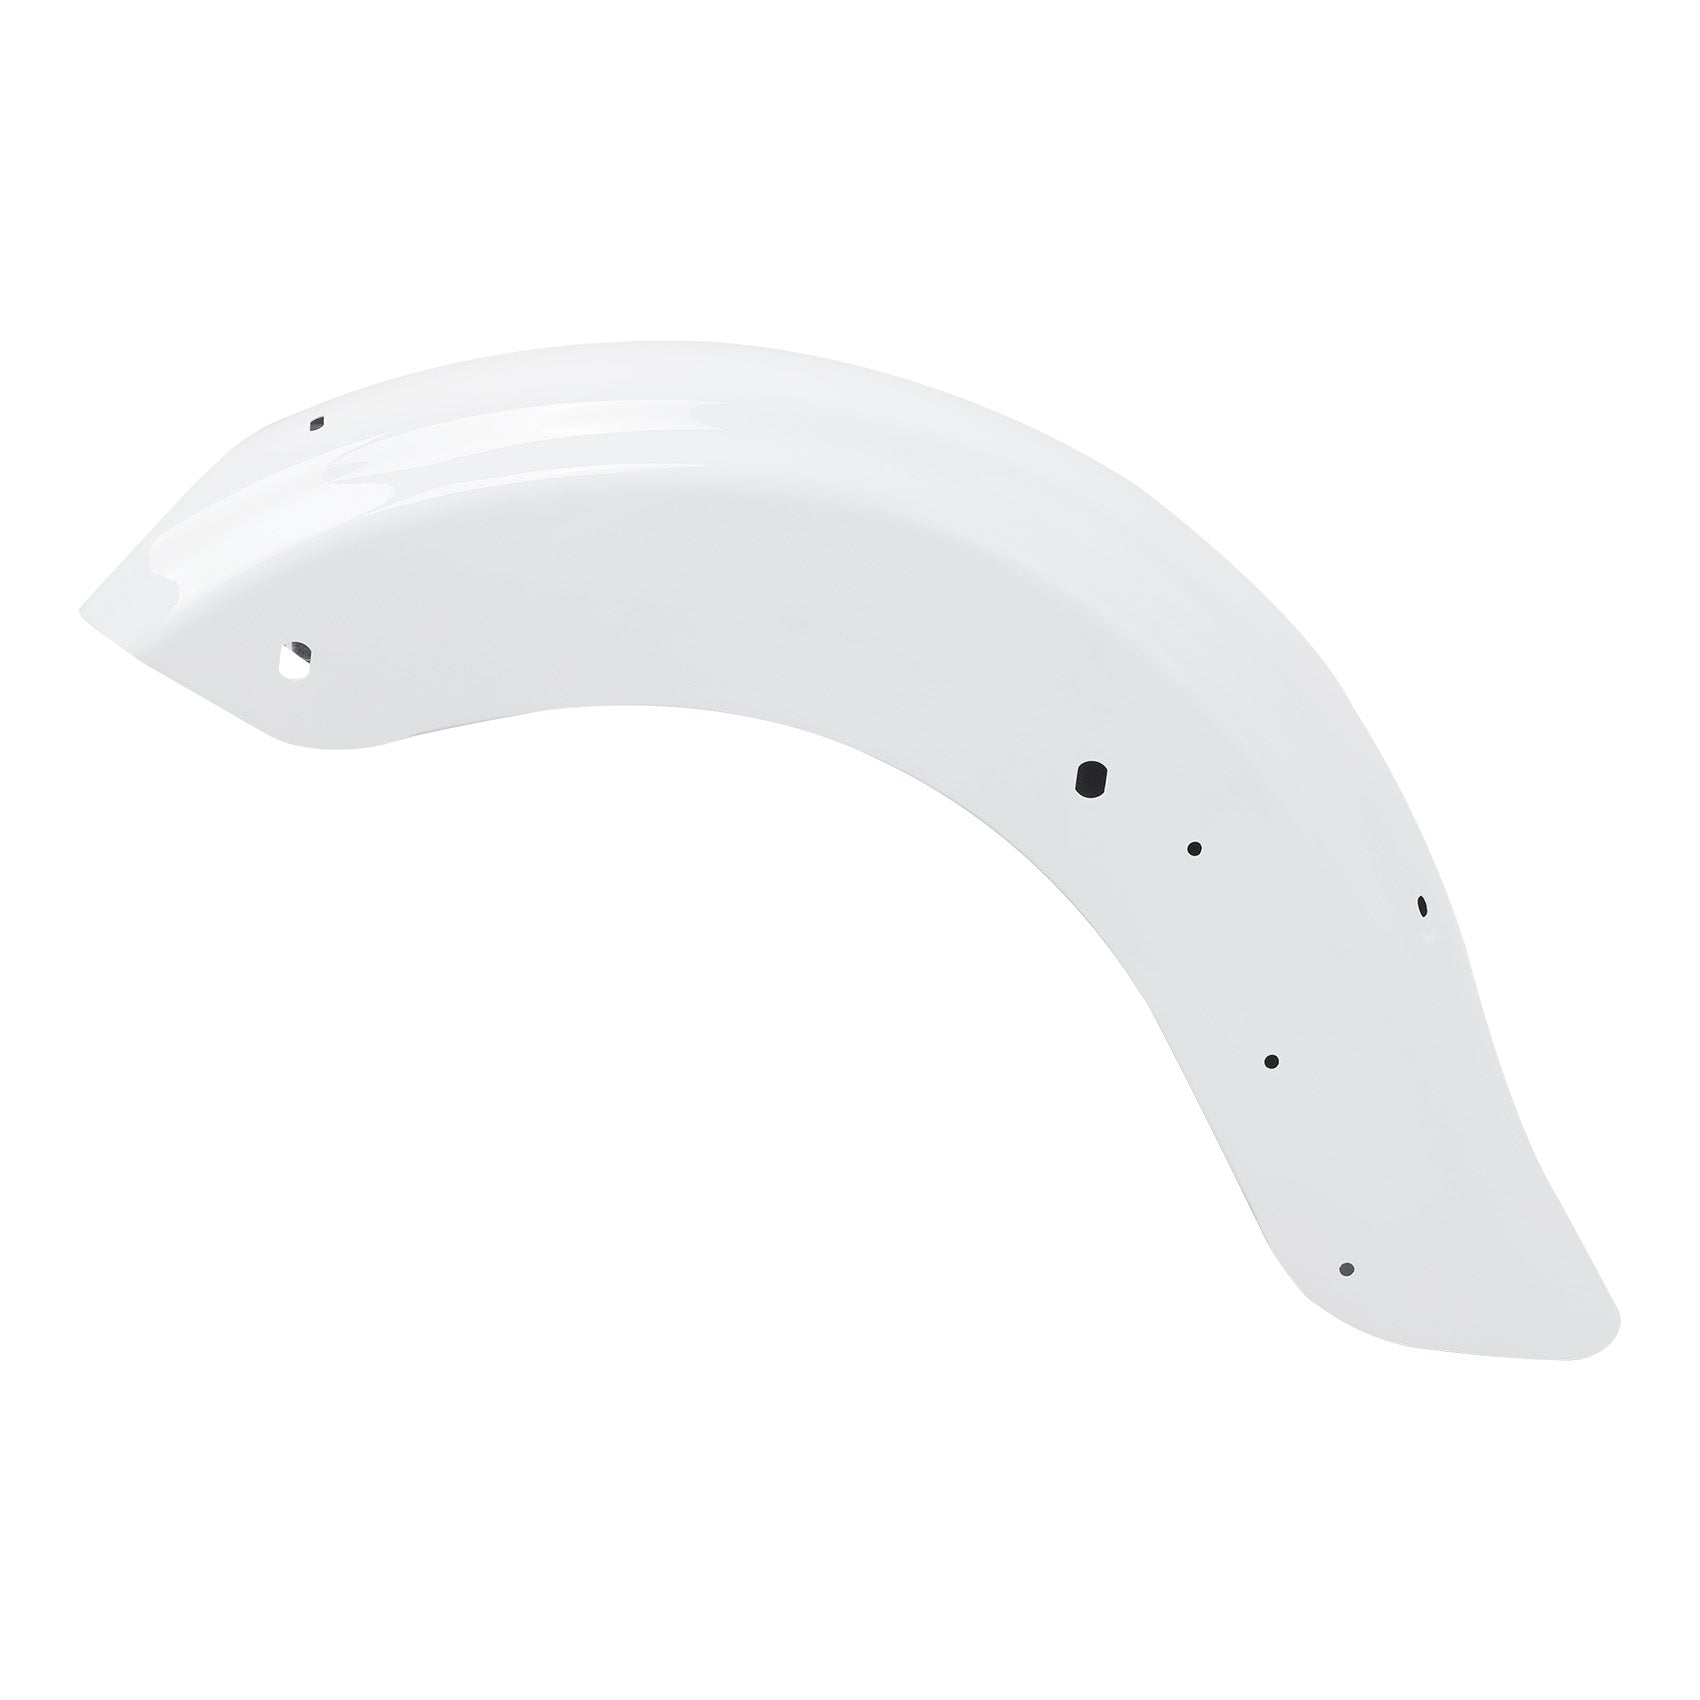 HR3 Stone Washed White Pearl Motorcycle Rear Fender Mudguard